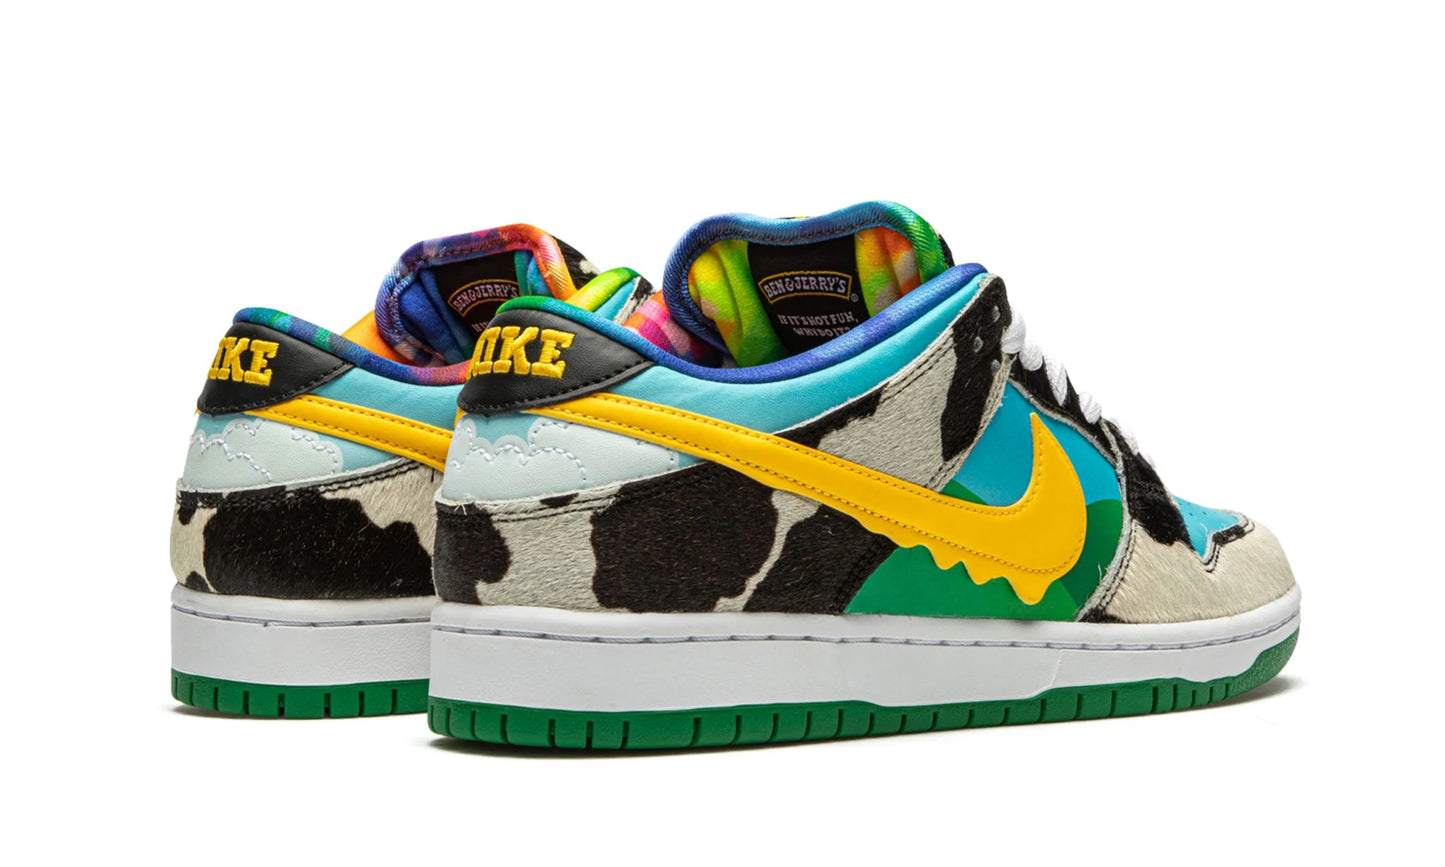 Nike SB Dunk Low "Ben & Jerry's - Chunky Dunky"